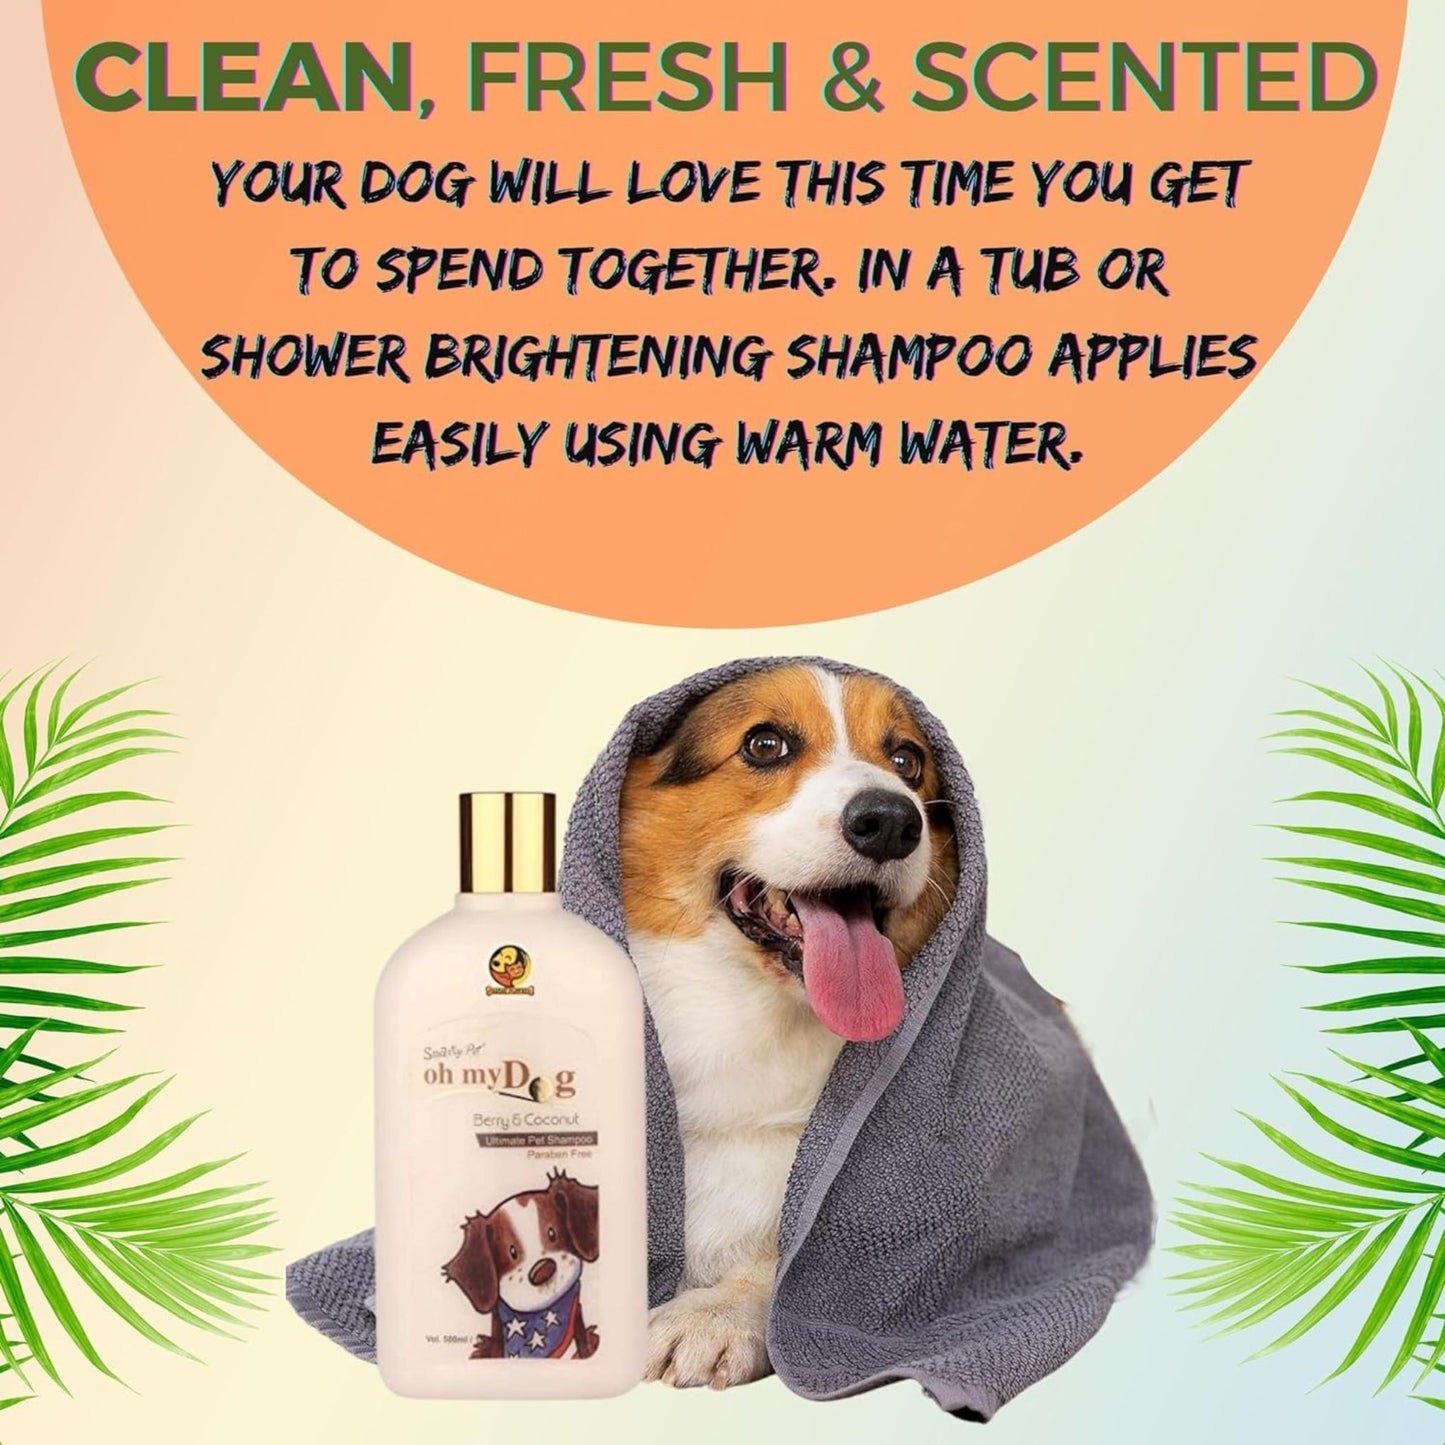 Oh My Dog Pet Shampoo for Puppies and Dogs (Berry Coconut,500ml)